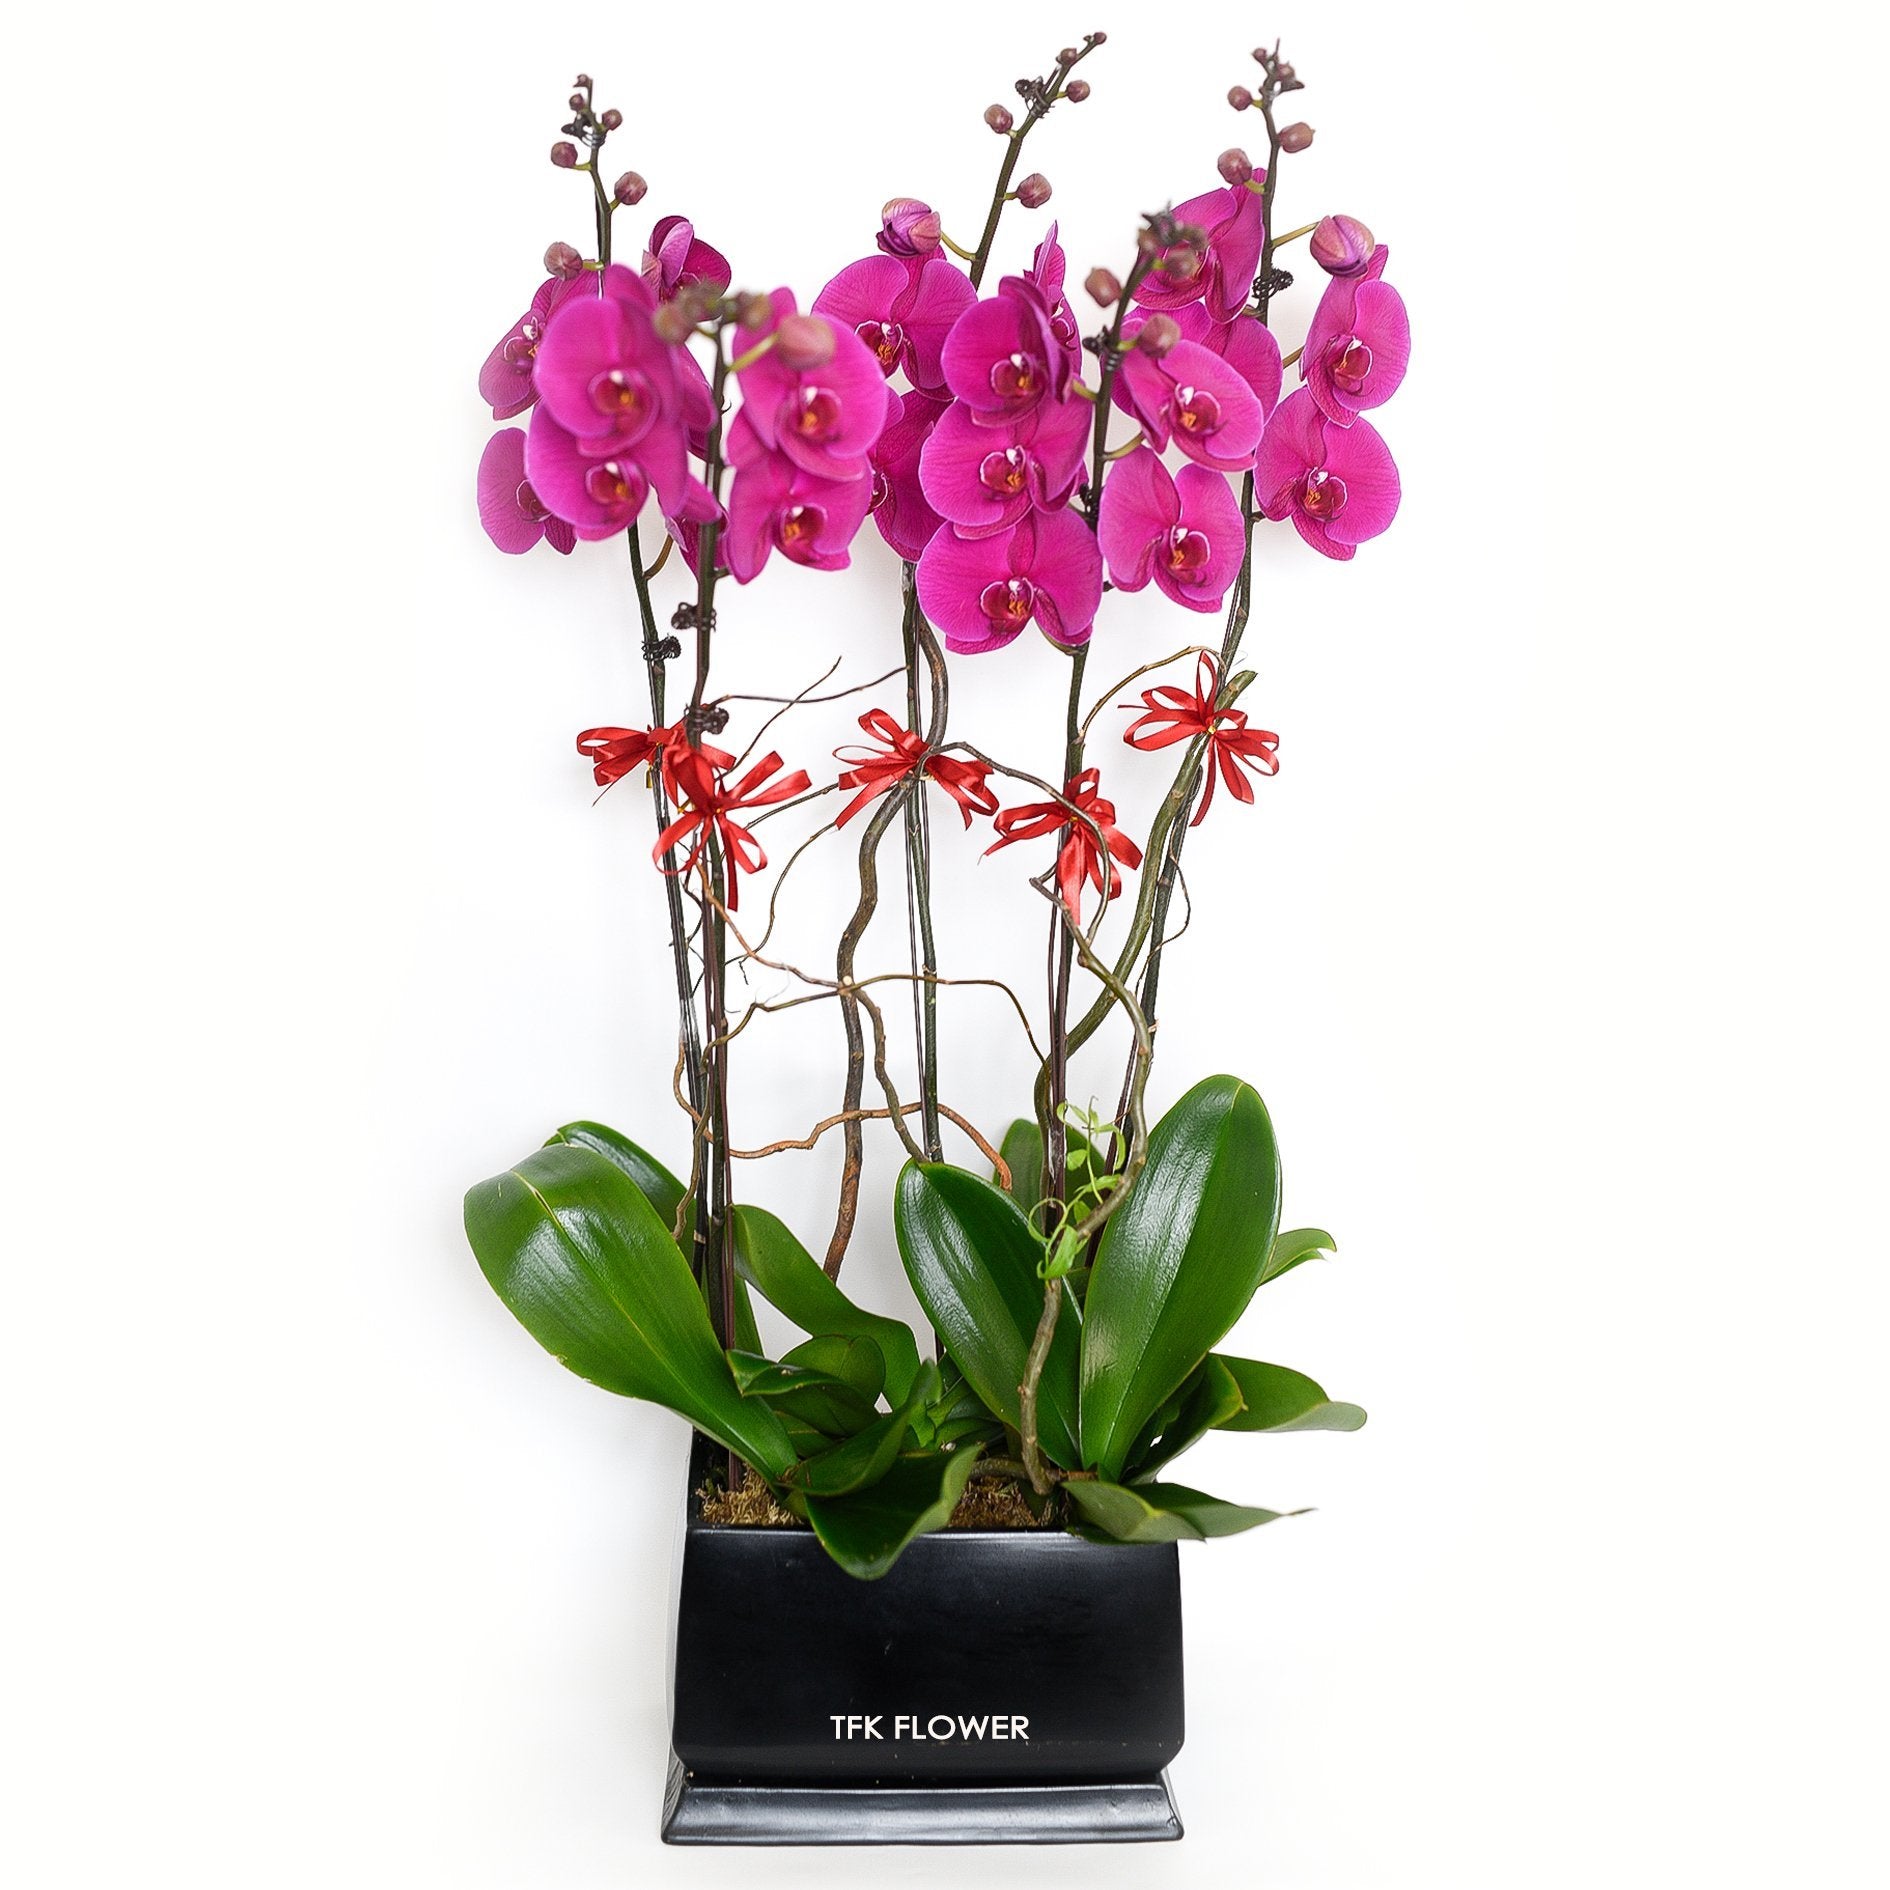 Orchid - Featured - TFK Flower